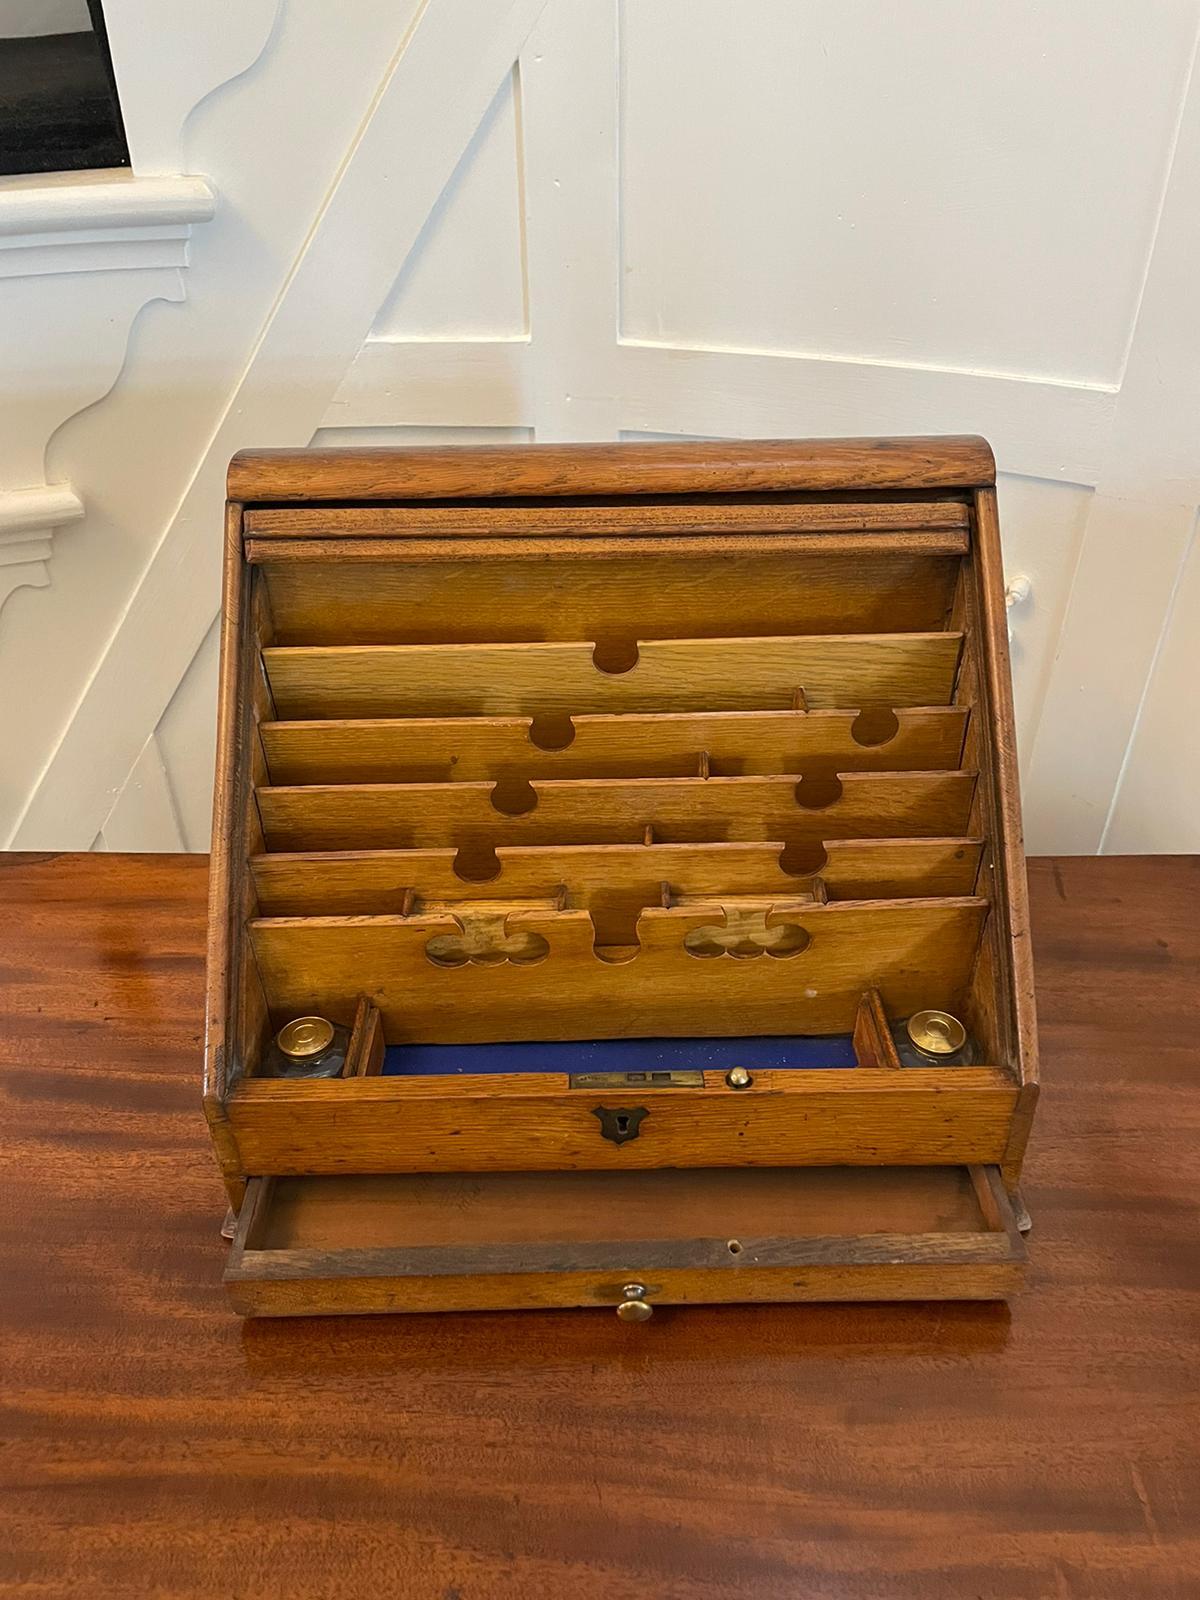 Unusual antique oak stationery cabinet with a sliding tambour front opening to reveal a fitted interior, original brass top ink bottles and a pop out drawer.

A quaint piece in lovely original condition.

Dimensions:
Height 31 cm (12.2